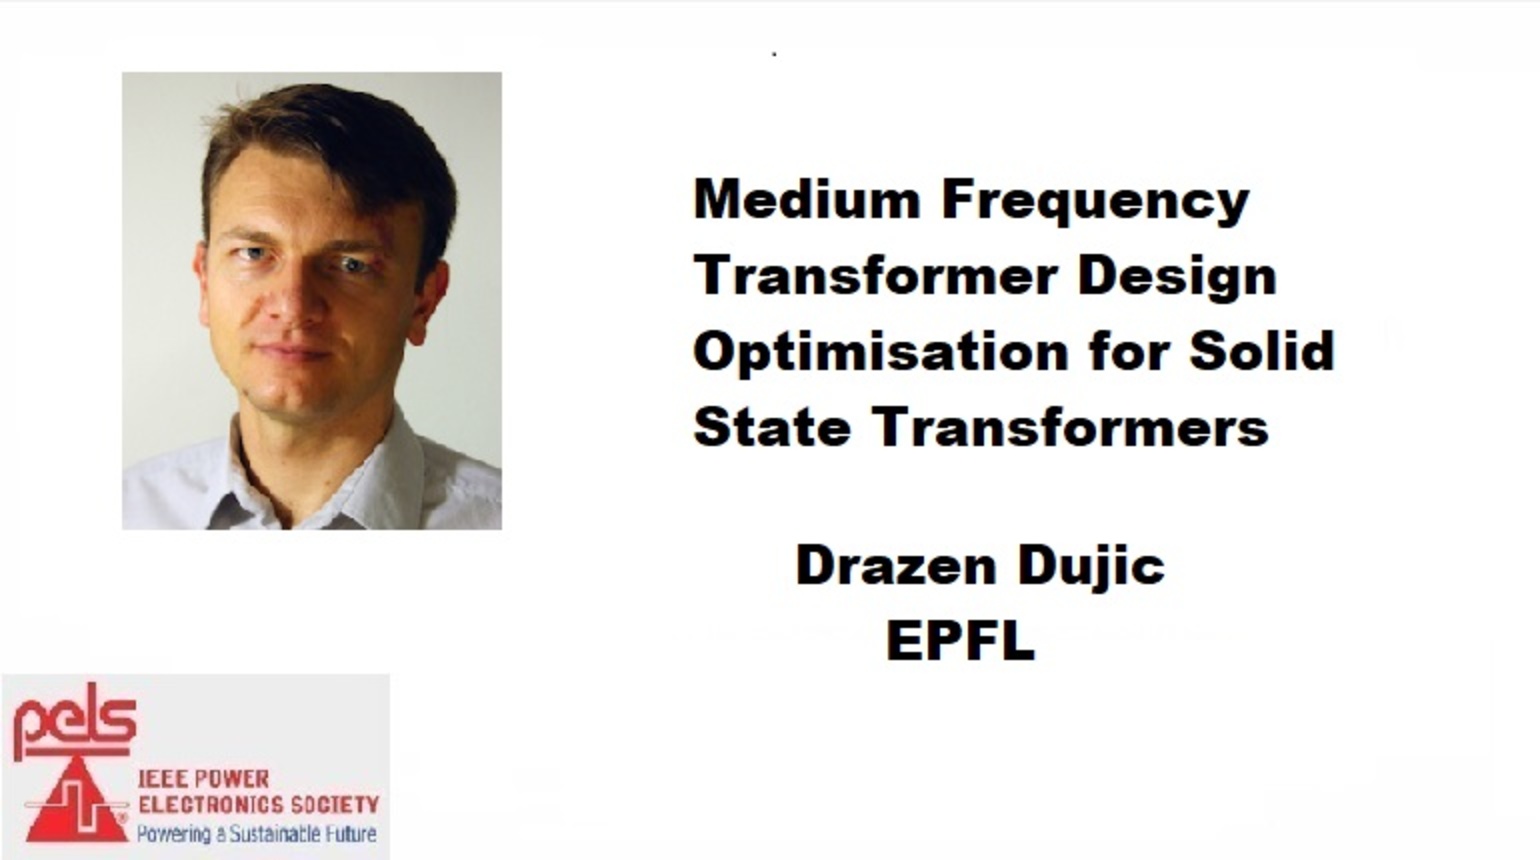 Medium Frequency Transformer Design Optimisation for Solid State Transformers